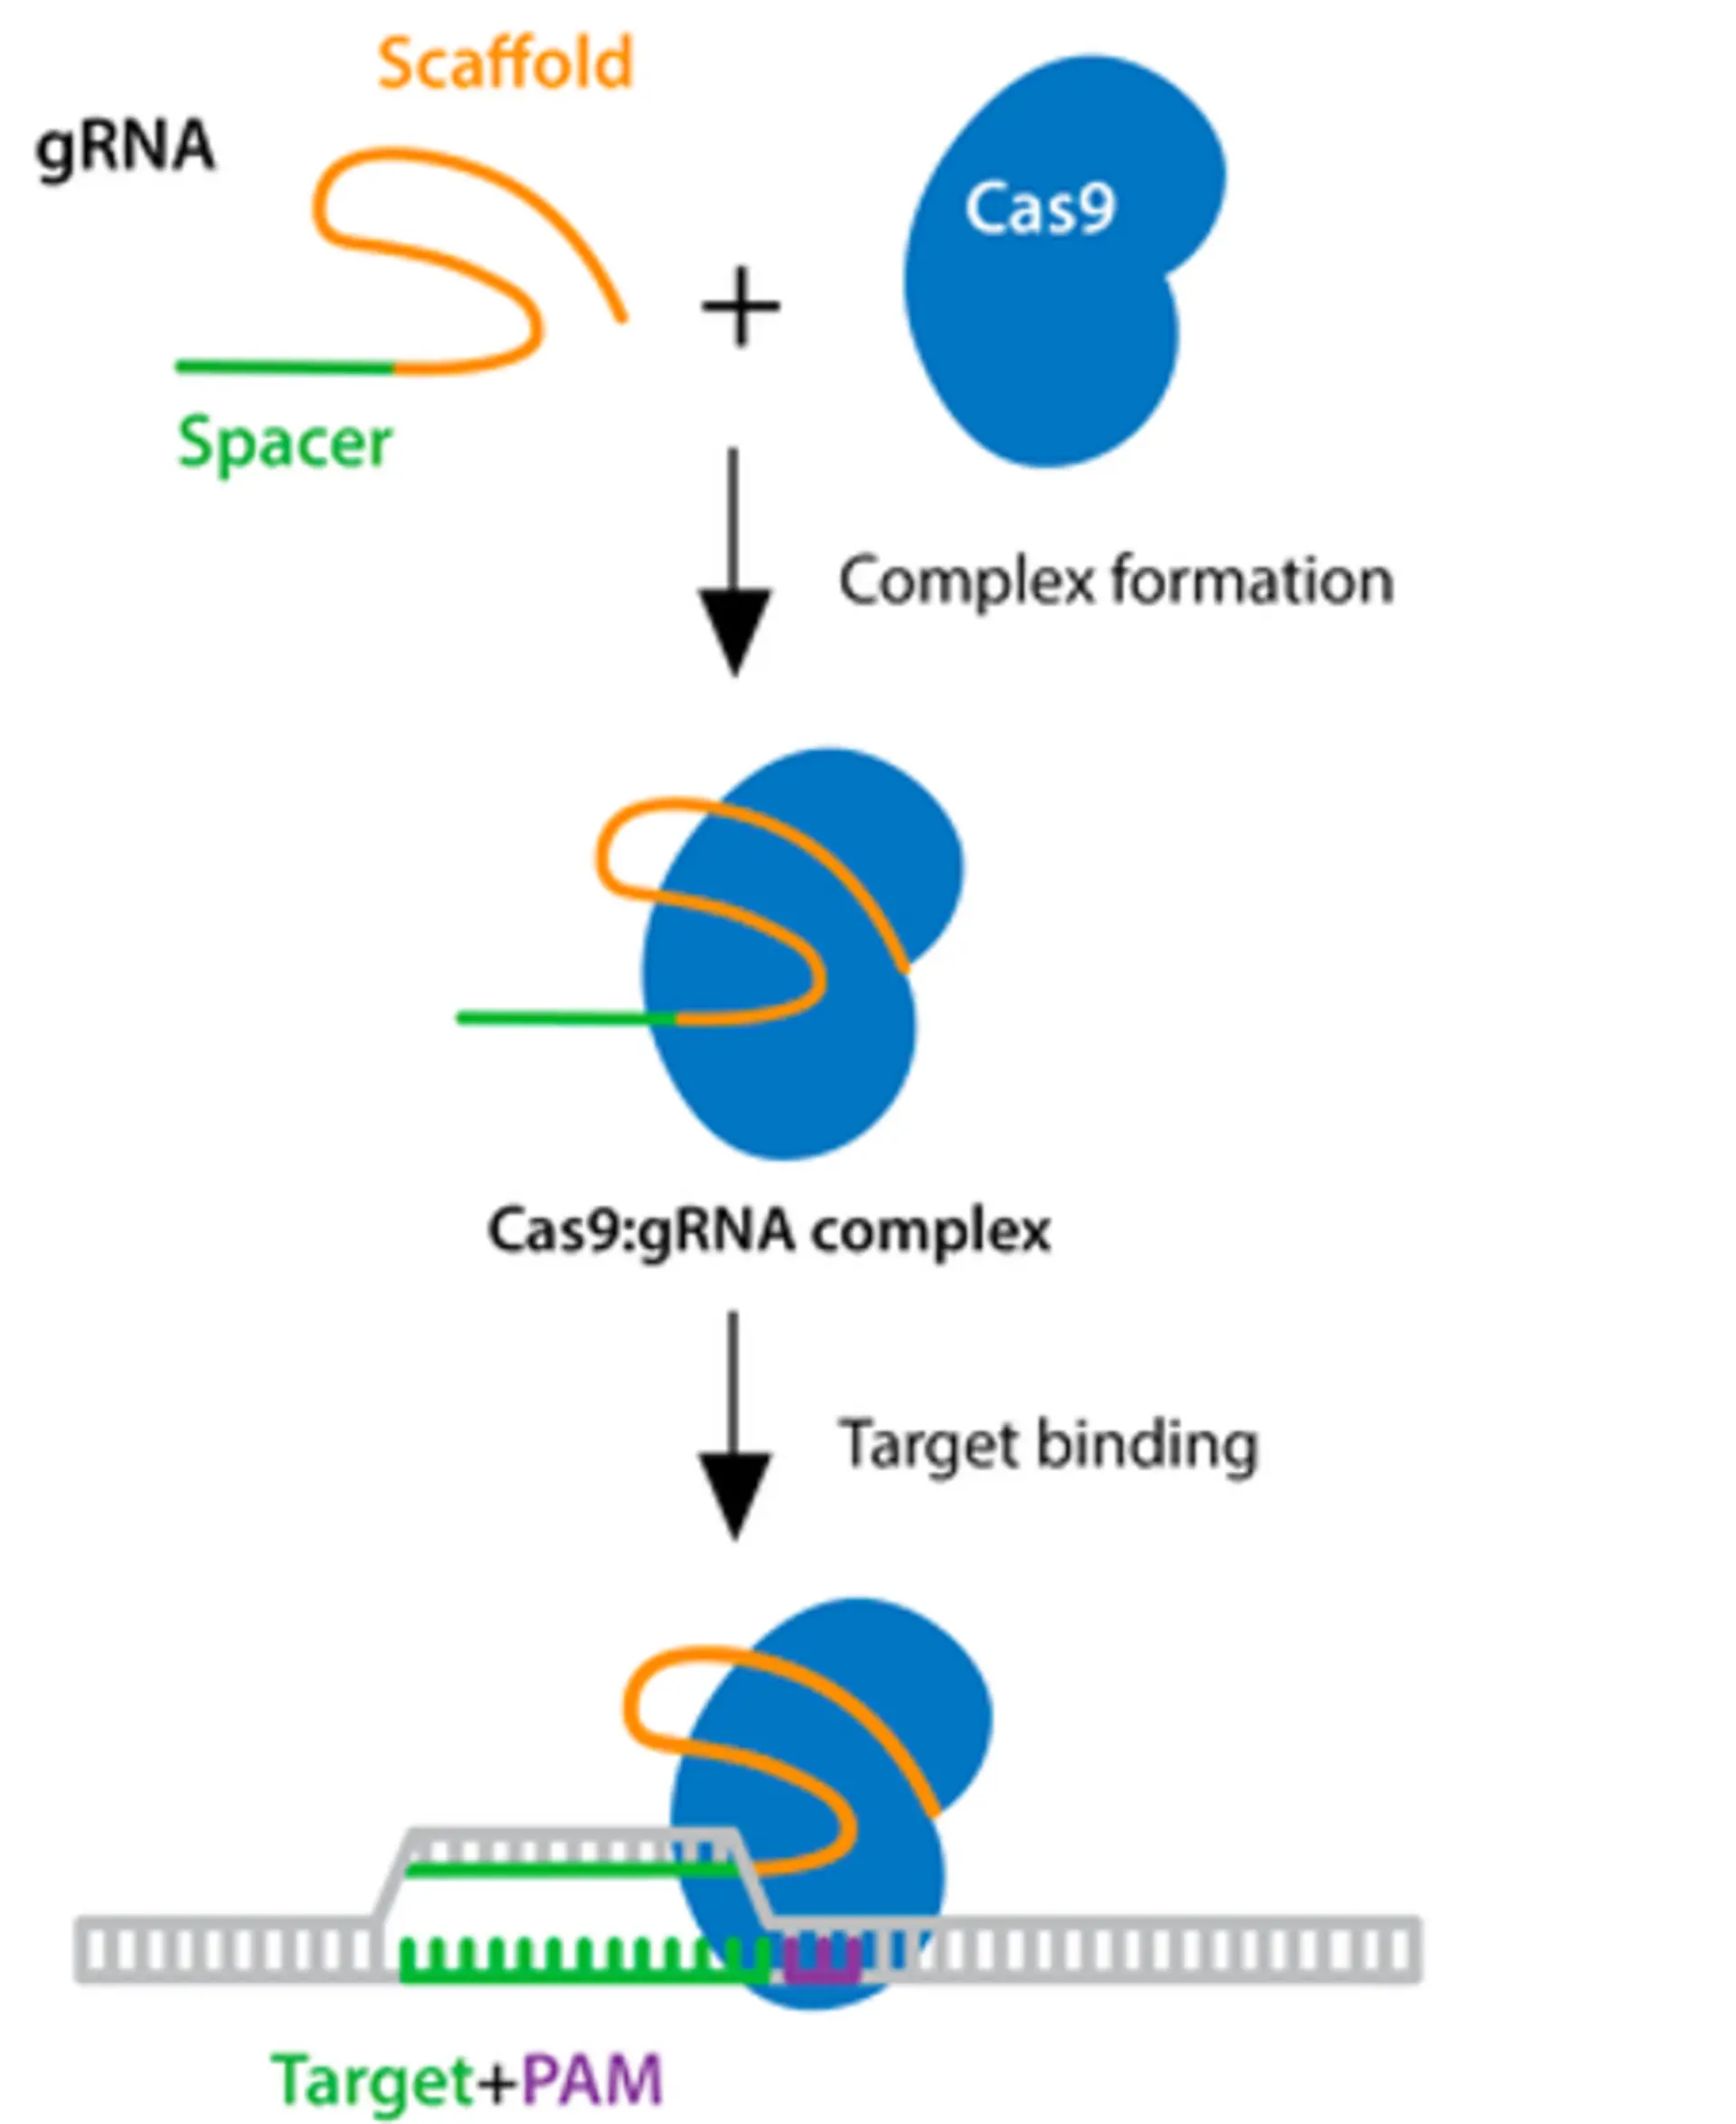 The CRISPR pathway uses the Cas9 endonuclease, which aquires sequences specificity to the target with the guide RNA. Once the Cas9-gRNA binds to the target region, DNA cuts are caused, which leads to edits.